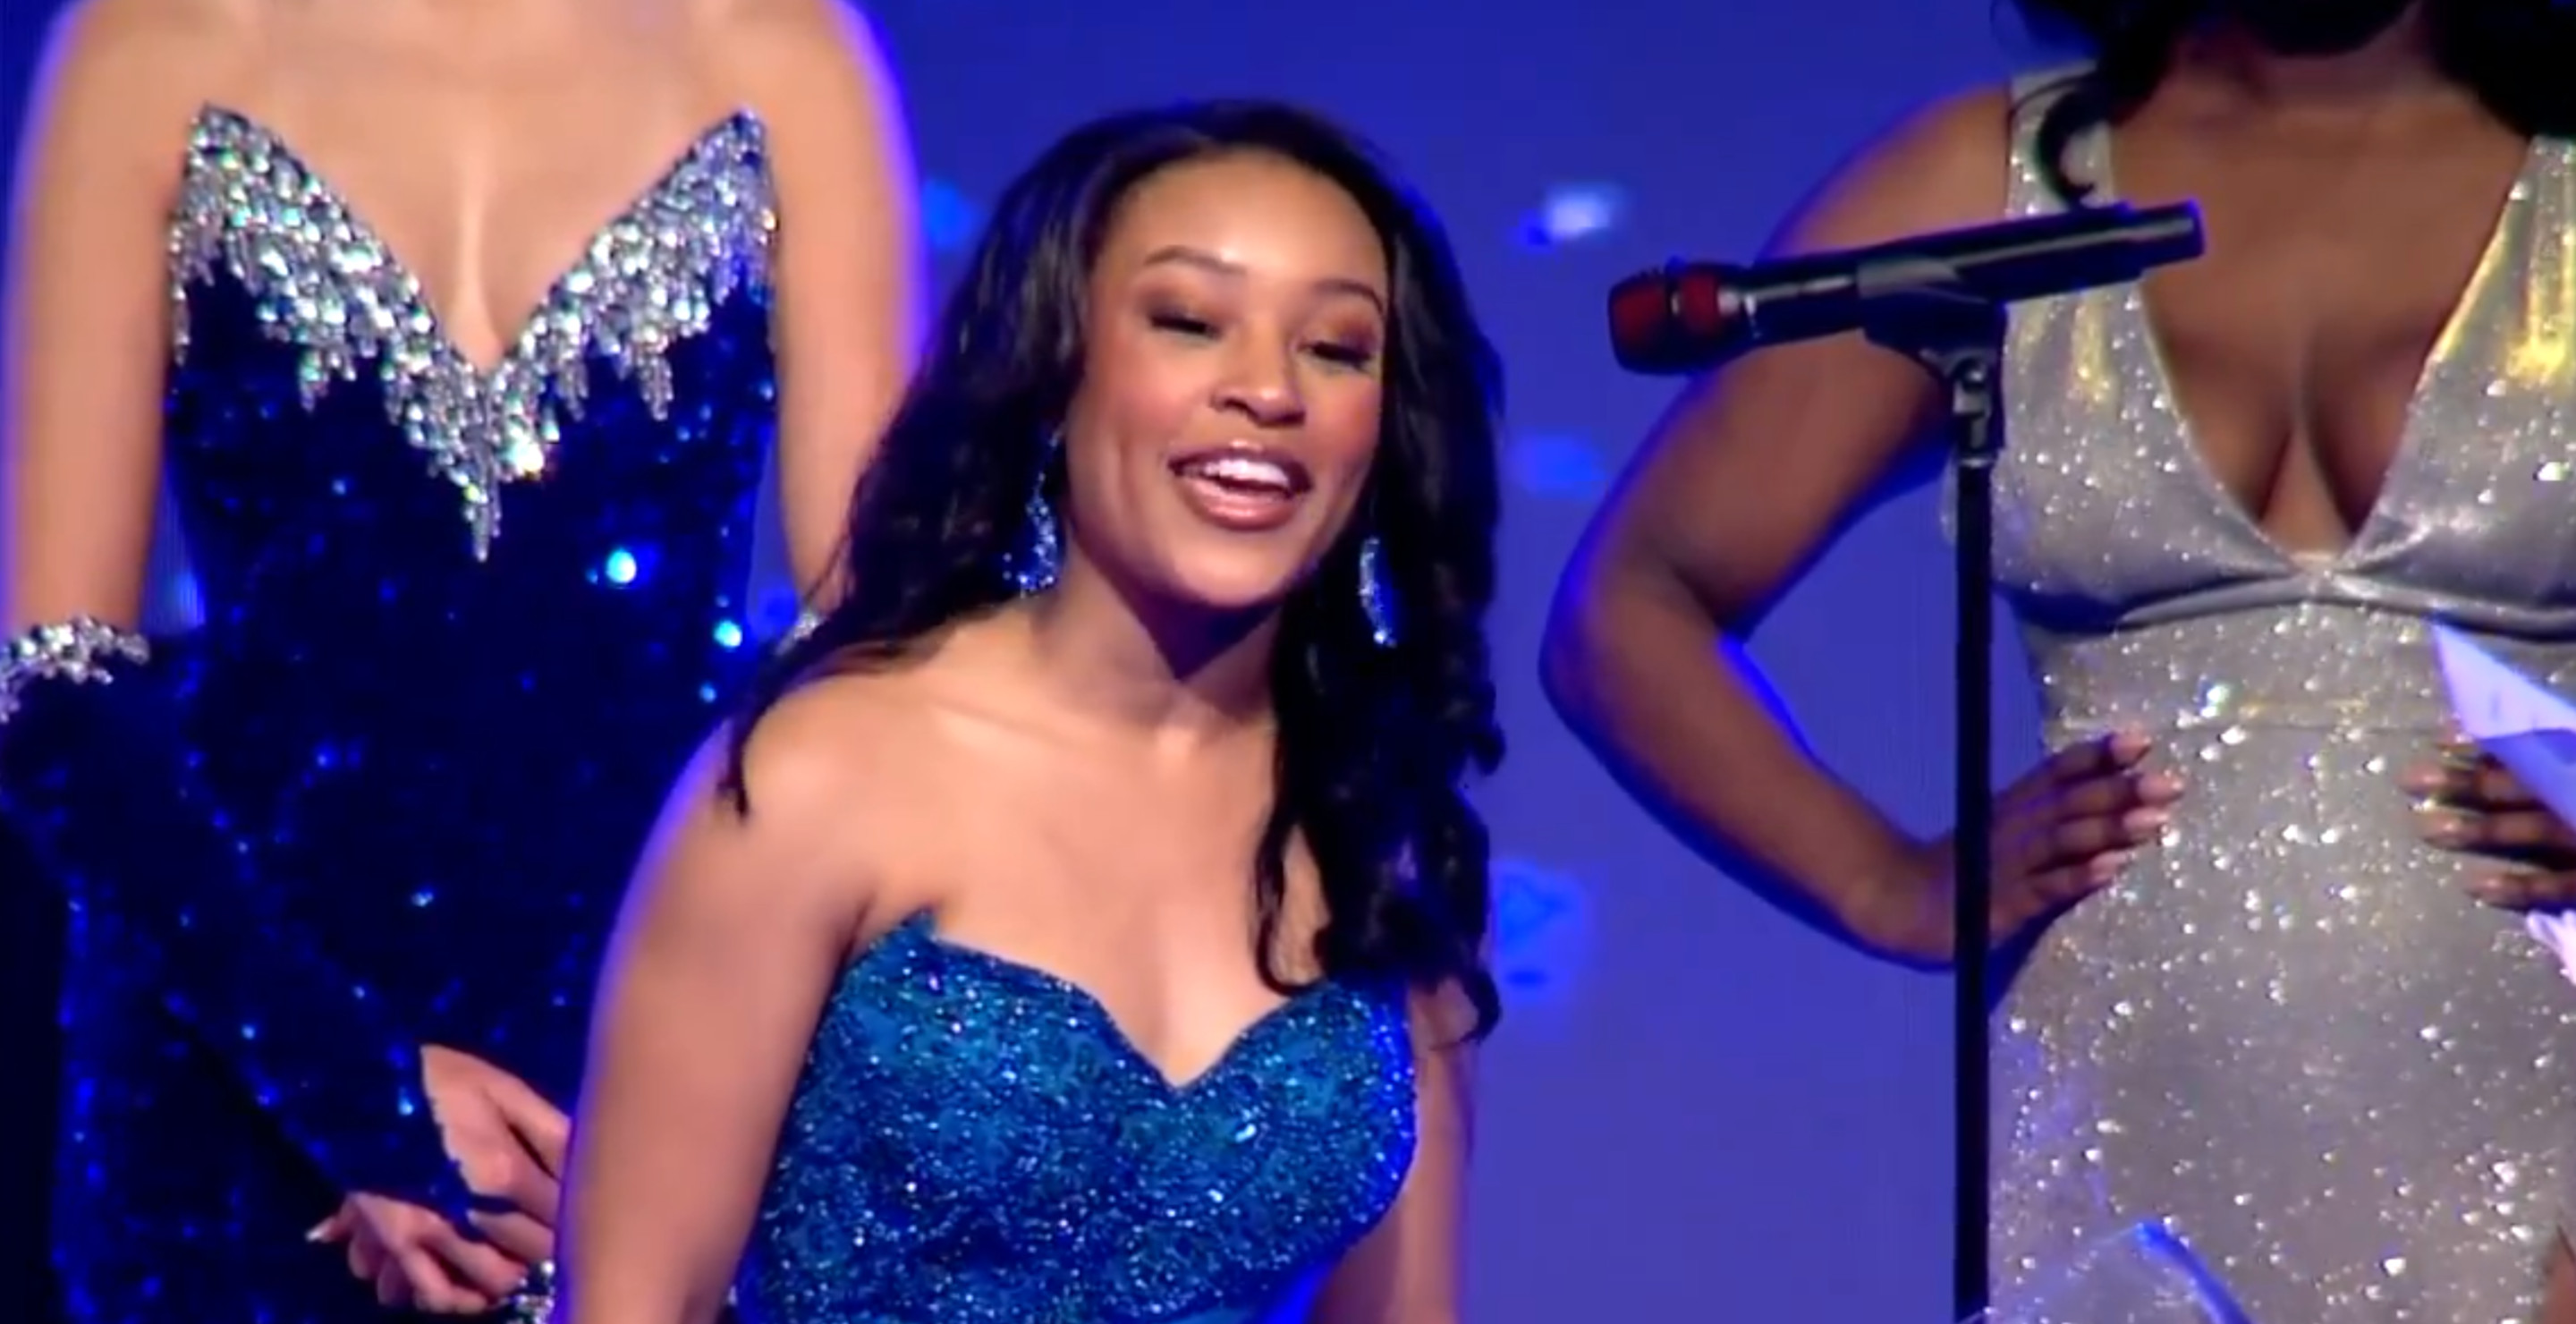 Miss Kansas Calls Out Abuser In The Audience While On Stage At Beauty Pageant